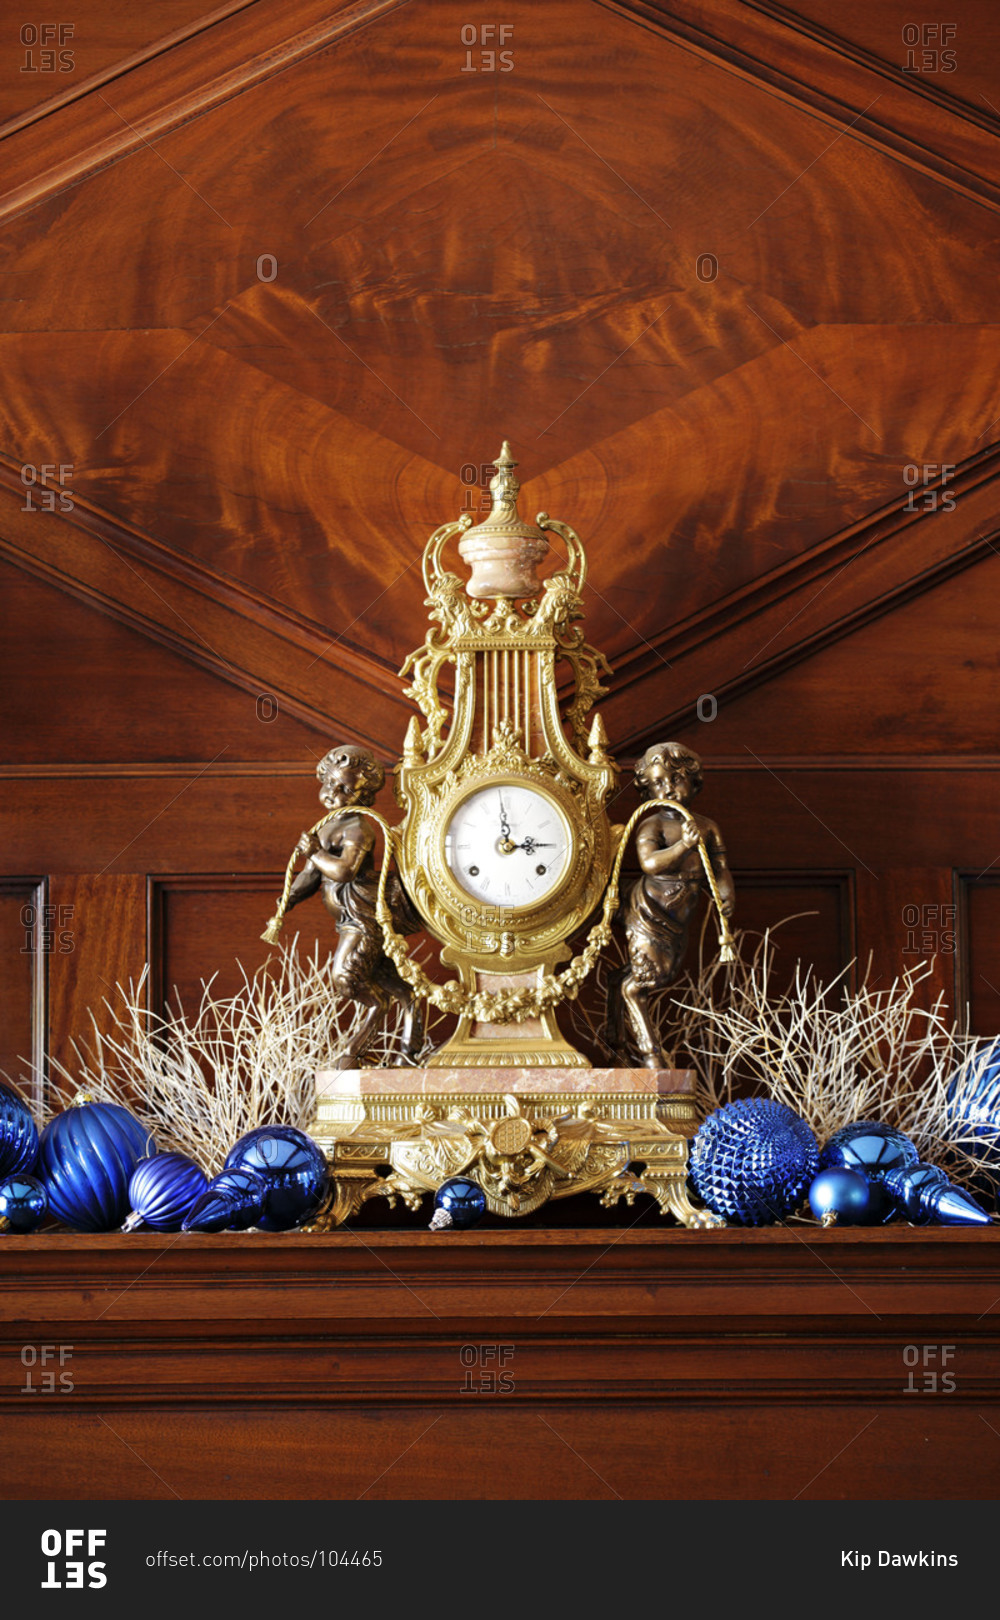 Mantle clock surrounded by ornaments